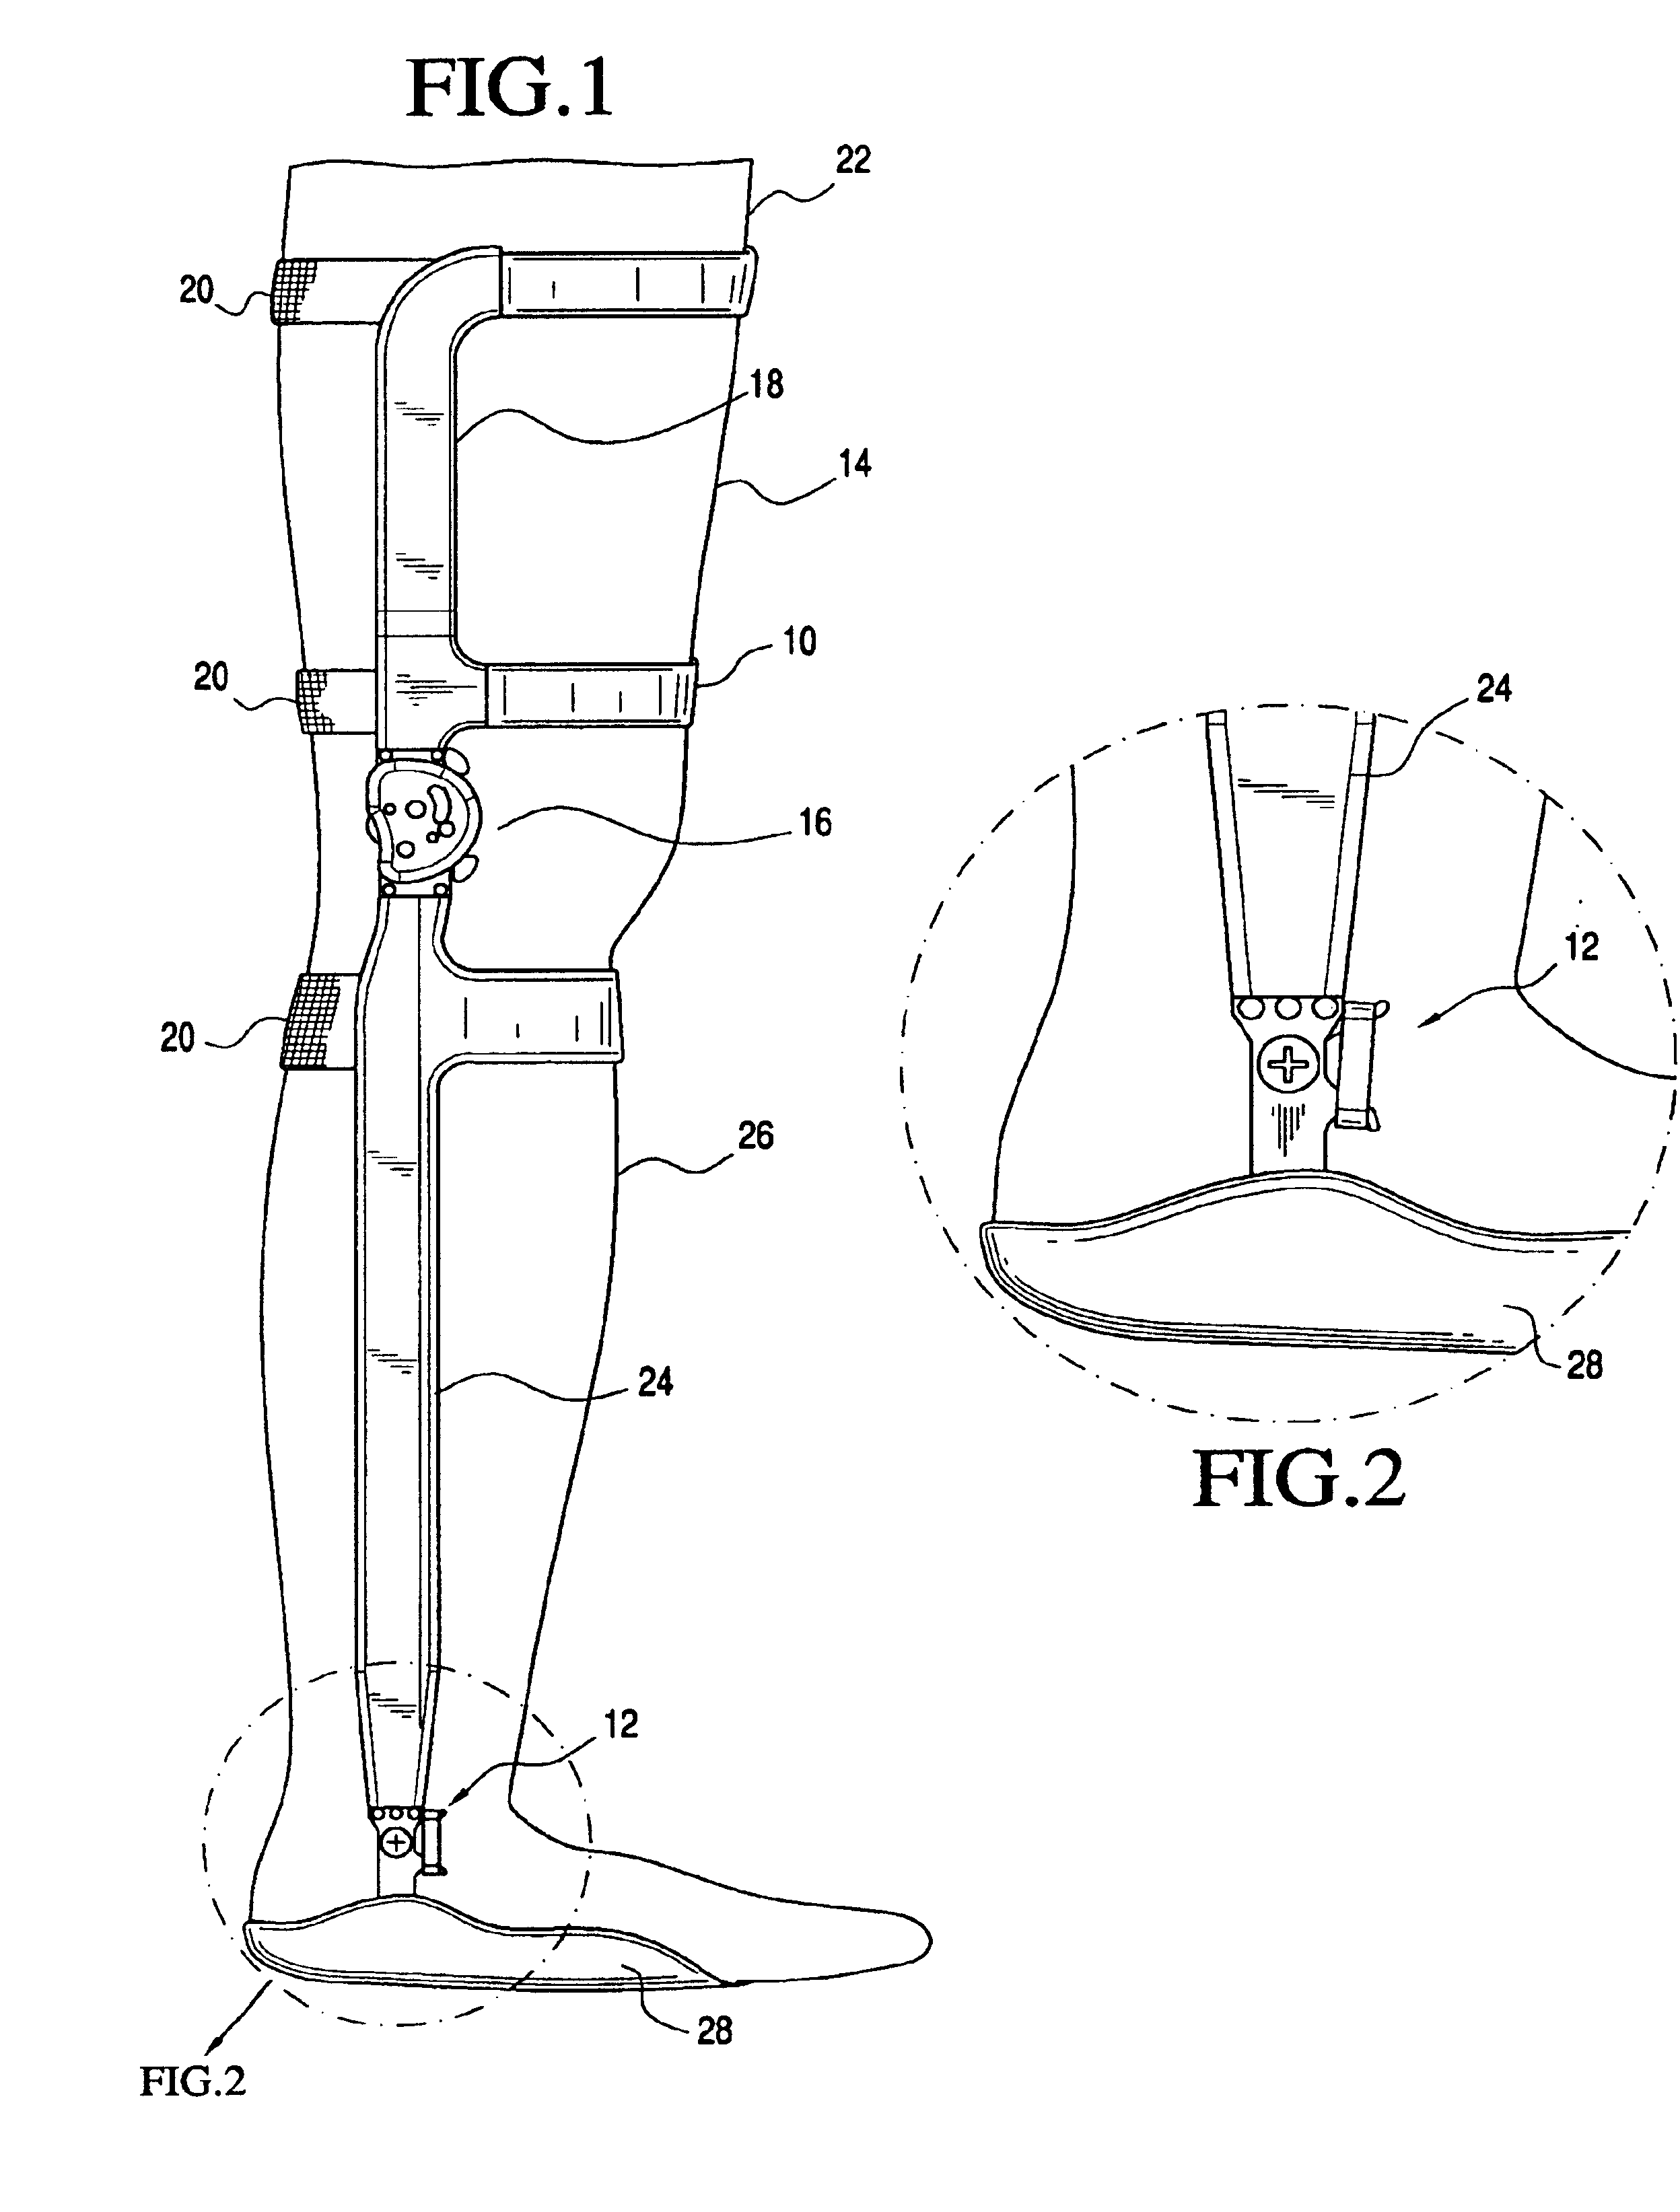 Tension assisted ankle joint and orthotic limb braces incorporating same